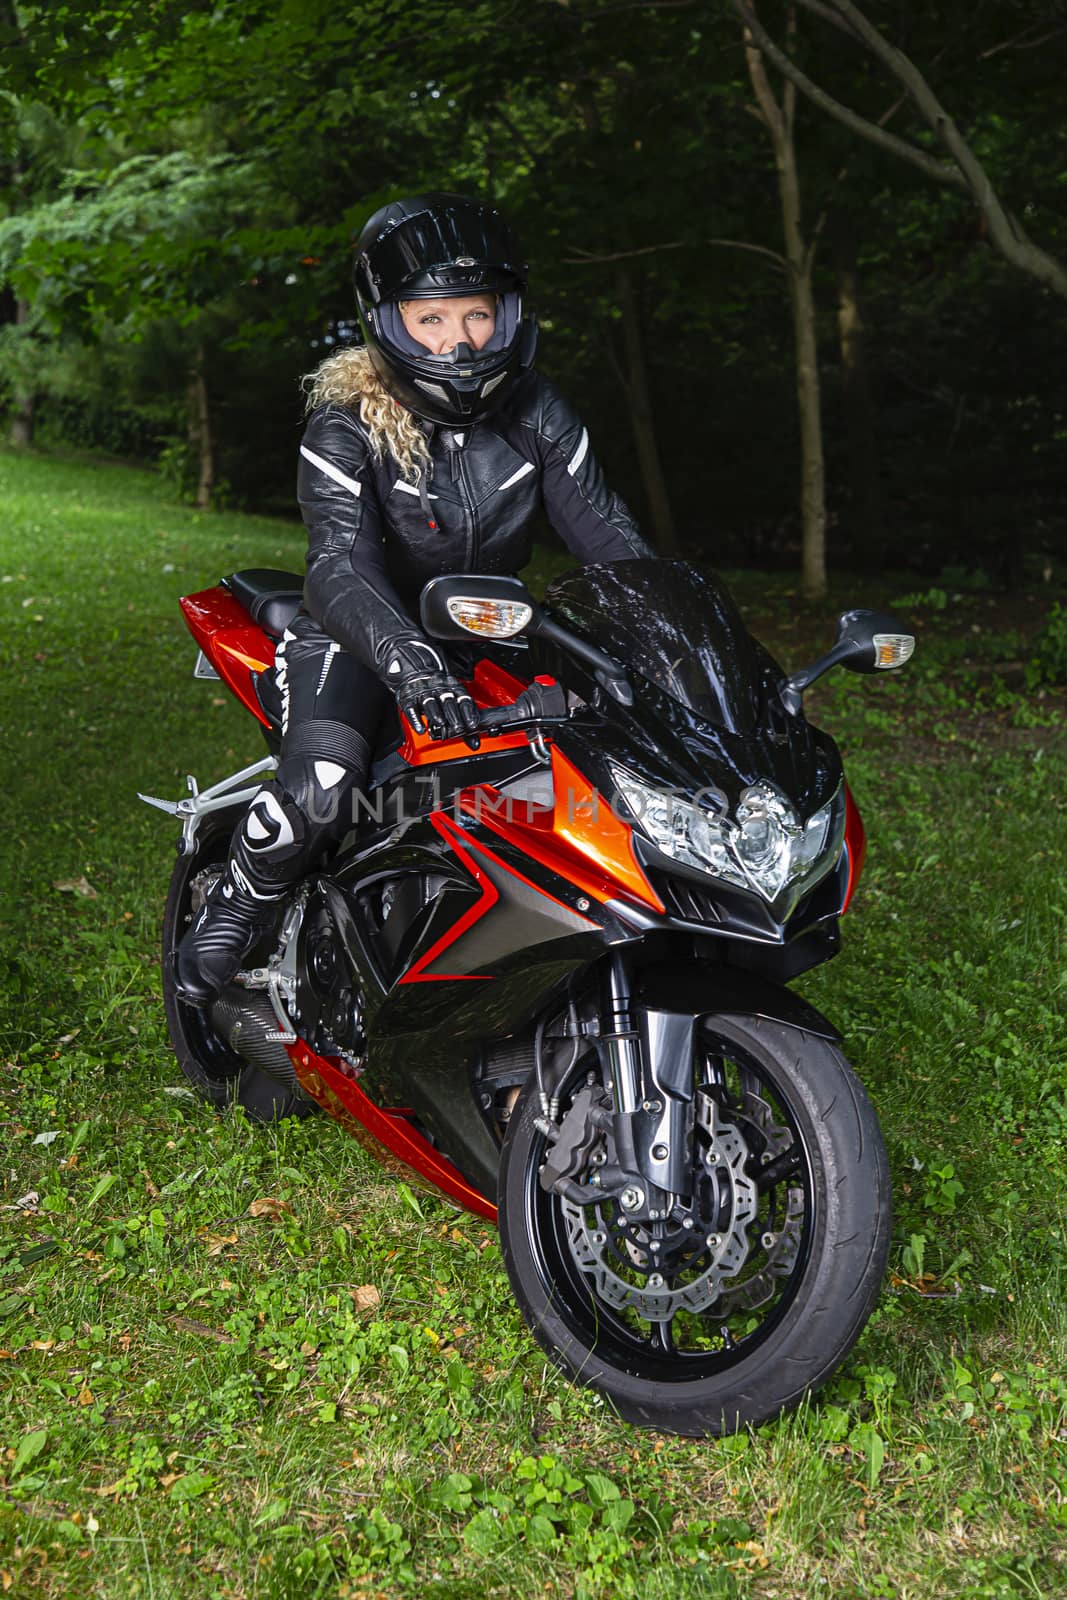 Woman wearing full protective gear sitting on a sport motocycle